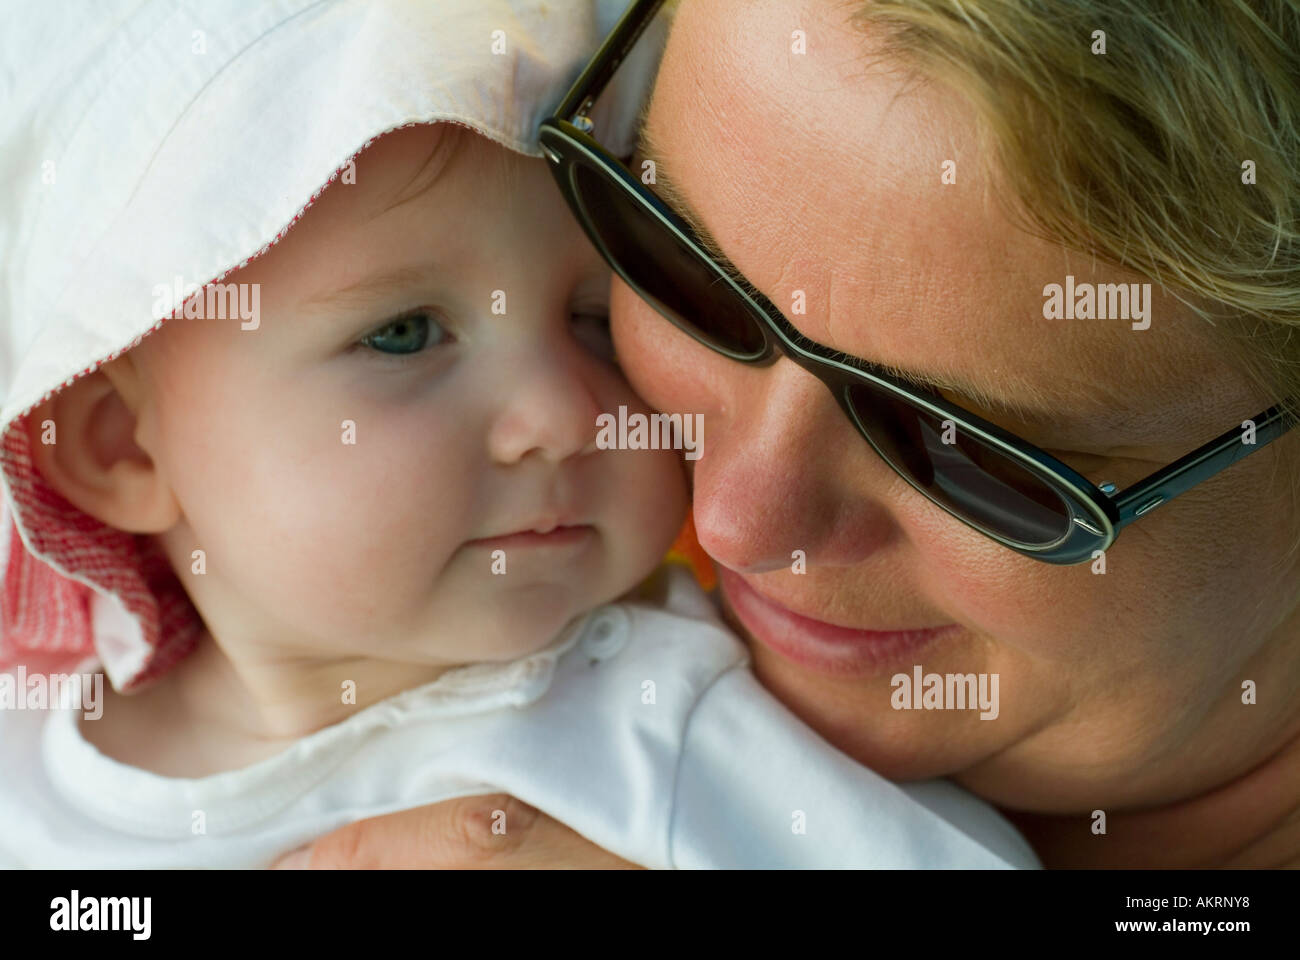 grandmother and grandchild baby of 8 months with sun hat and a woman in age of about 45 to 55 years with sunglasses Stock Photo